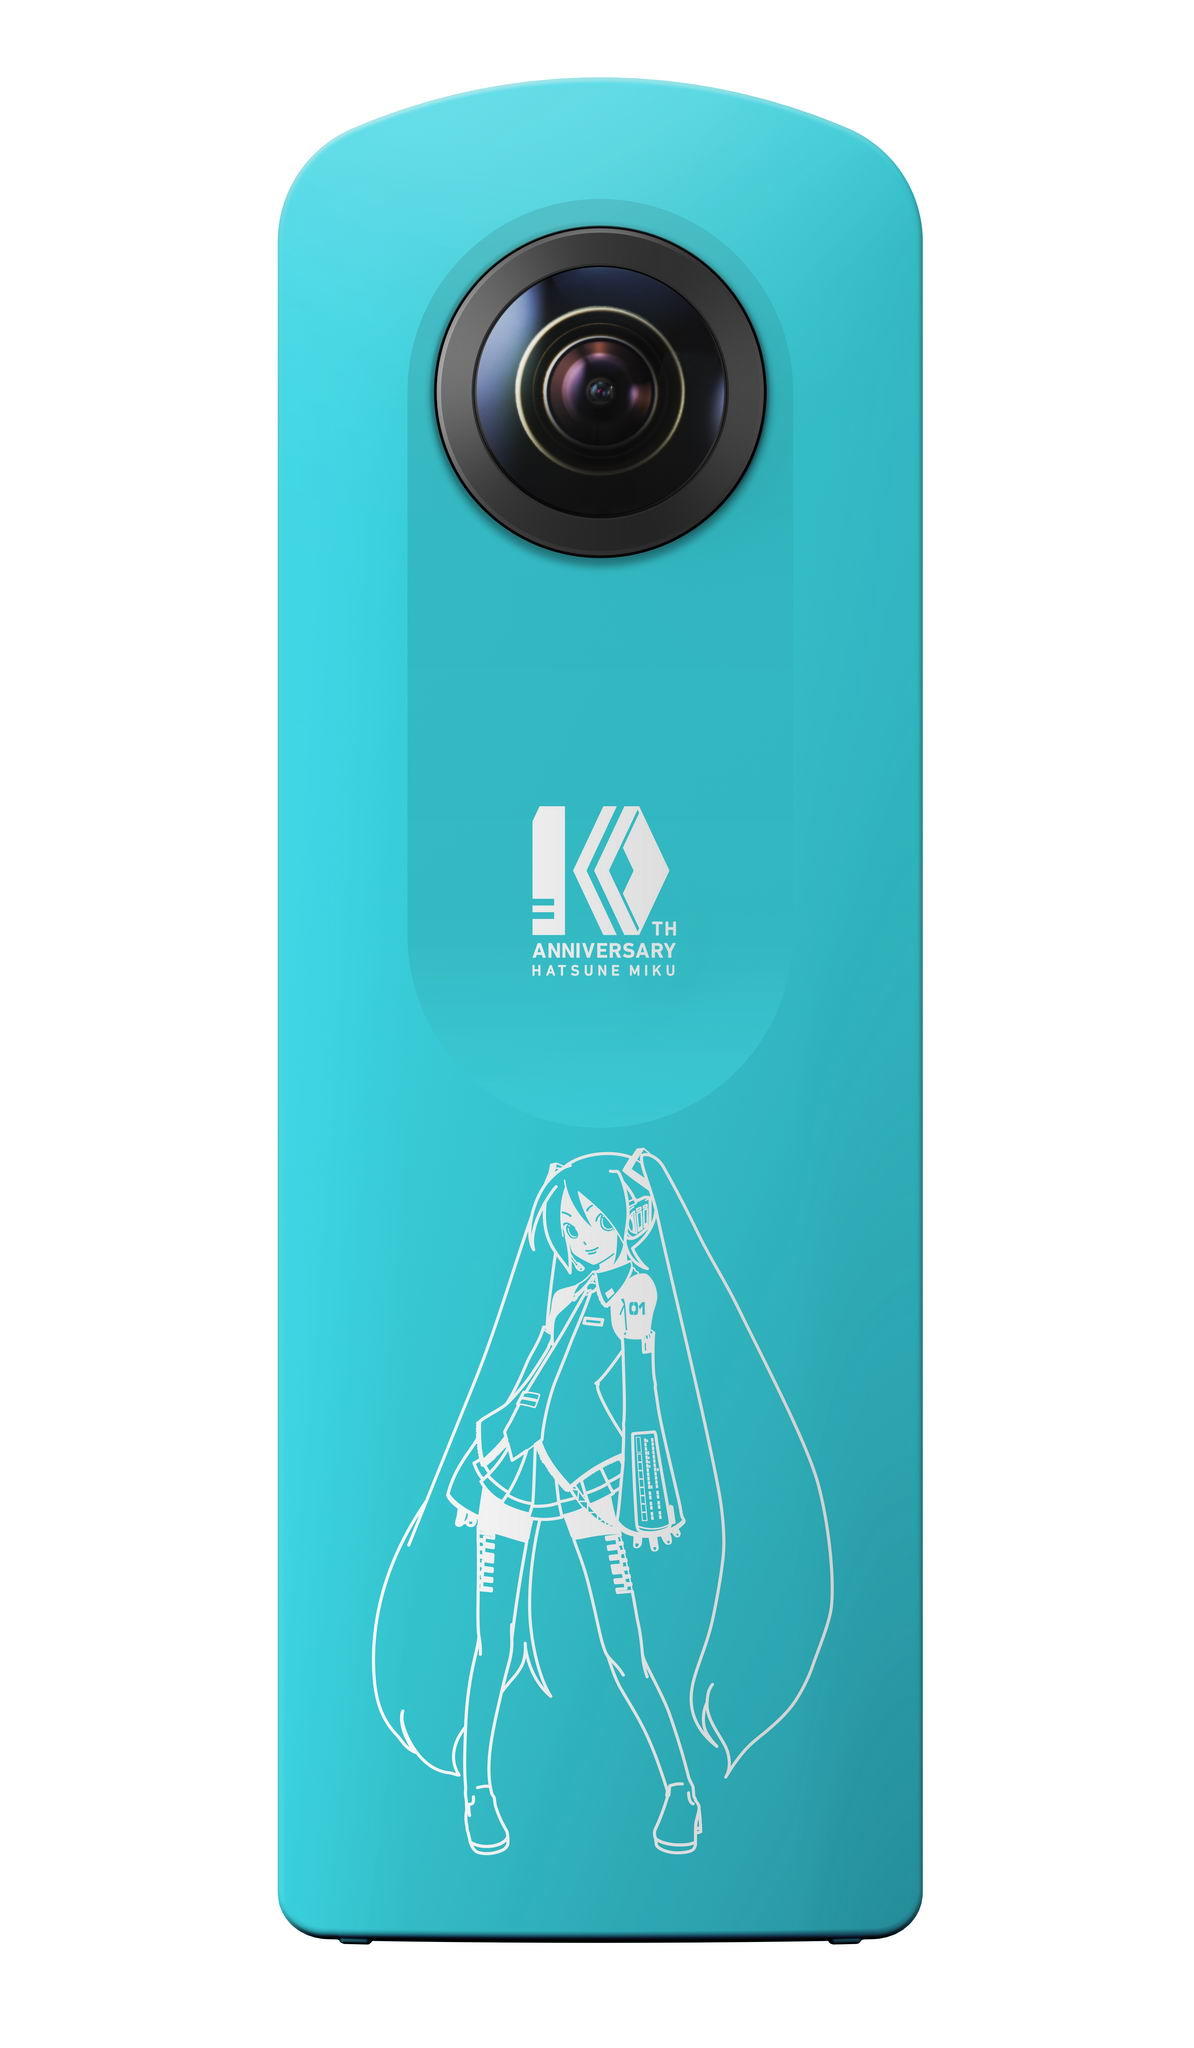 RICOH THETA SC Type HATSUNE MIKU” Will Be Released A limited model